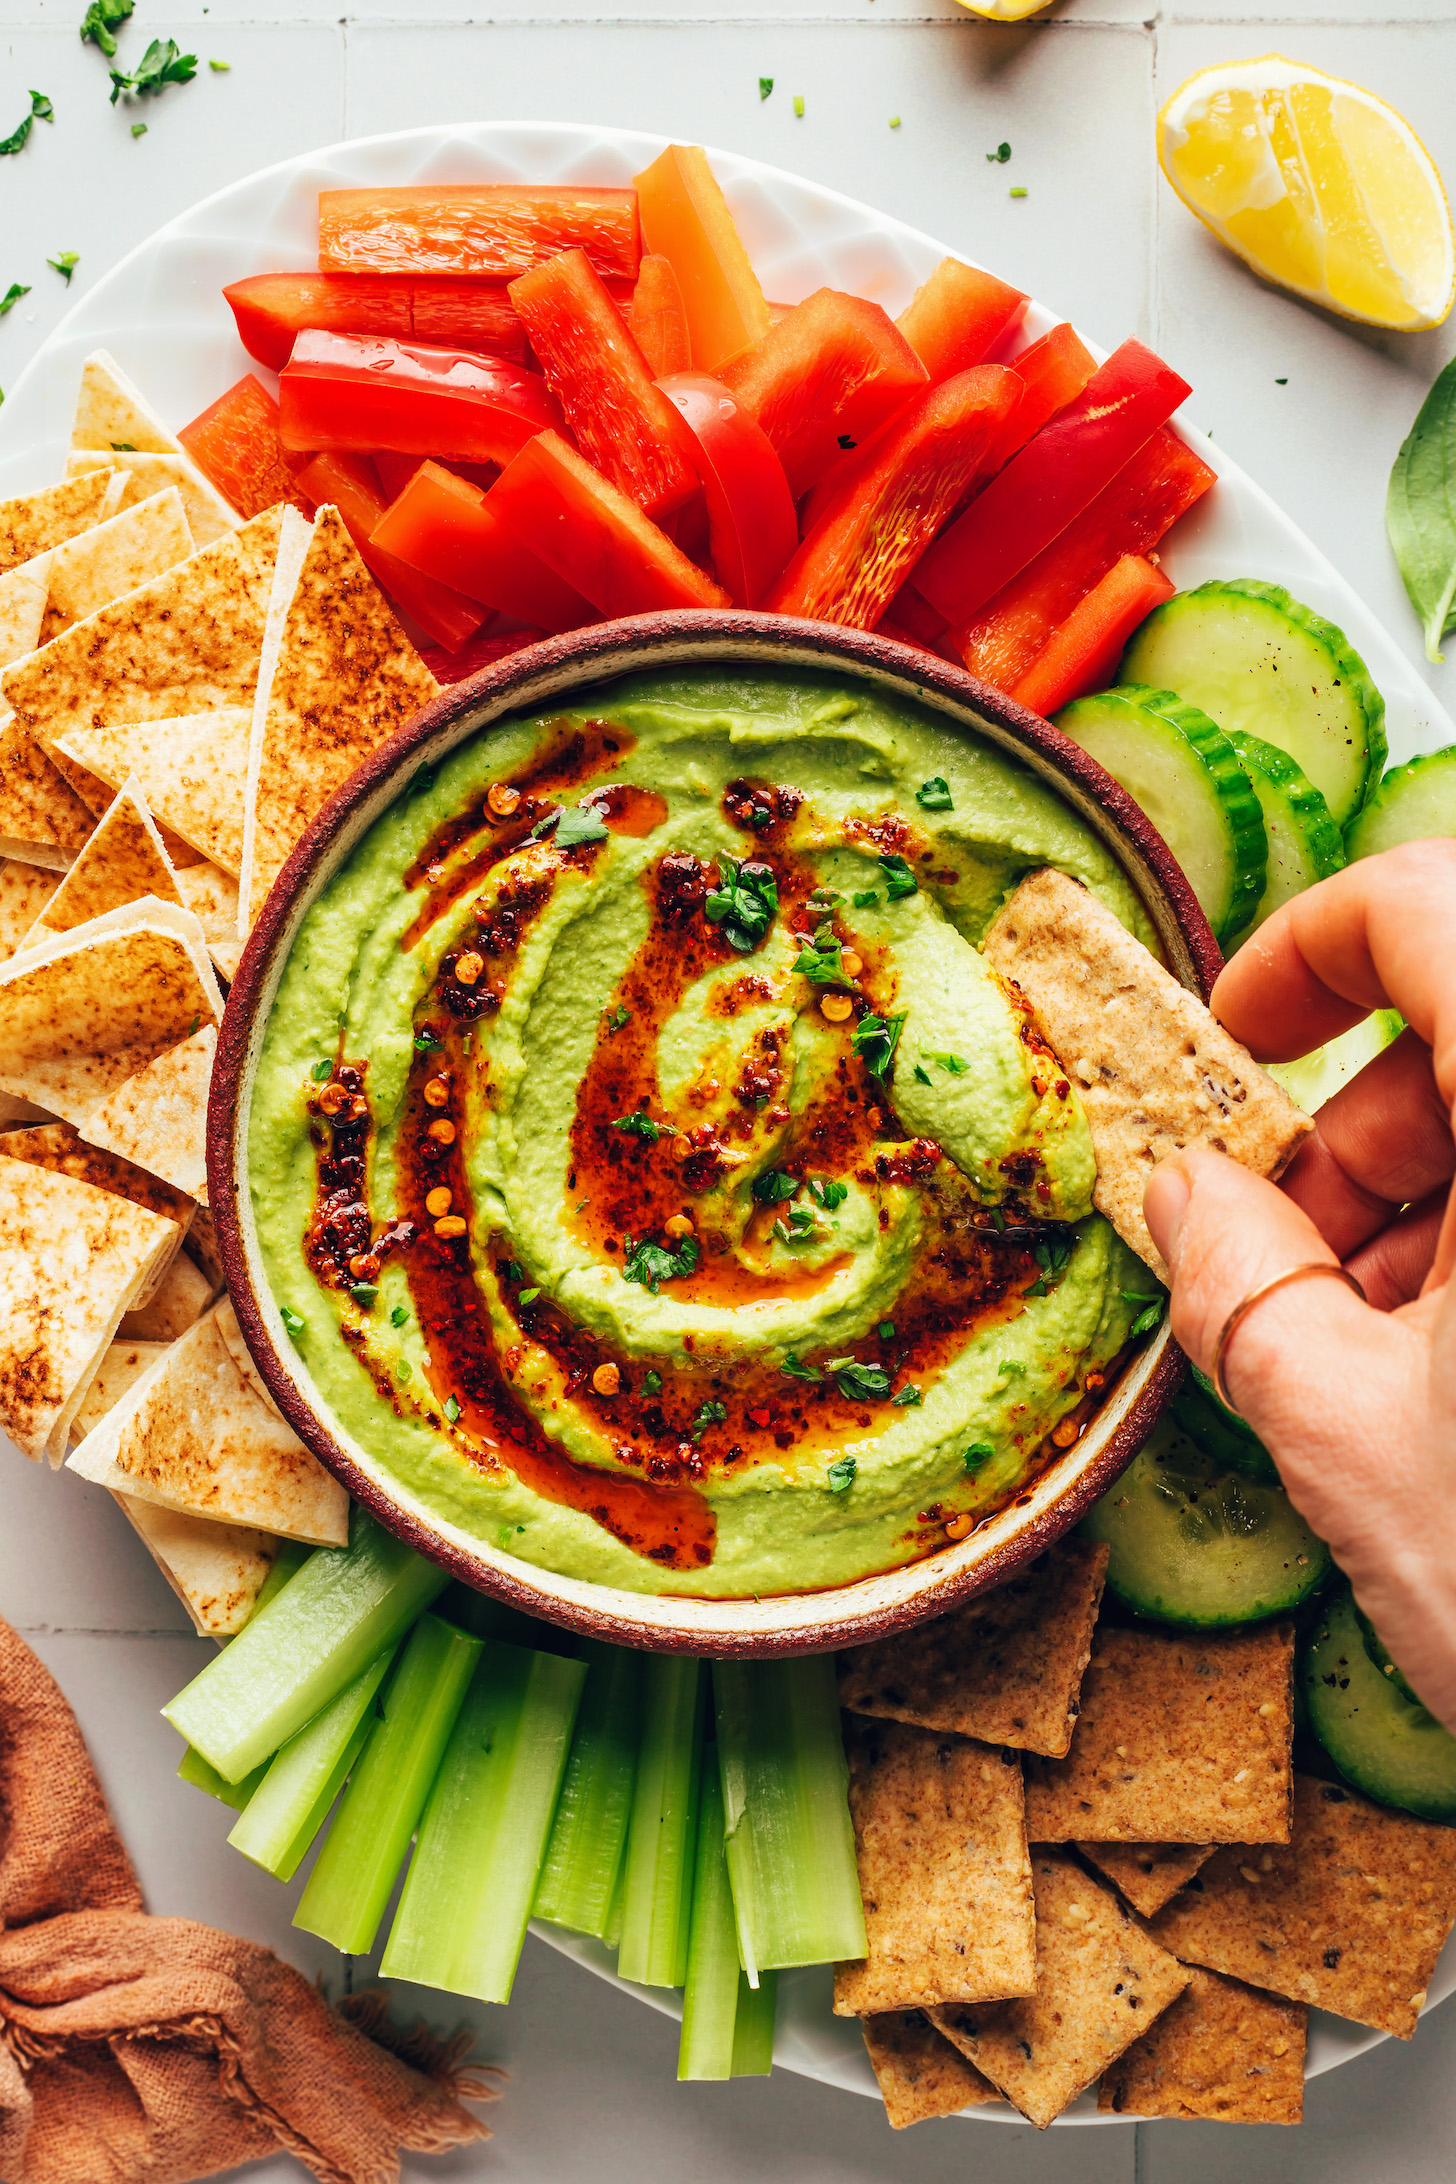 Dipping a cracker into a bowl of green goddess hummus topped with chili oil and parsley